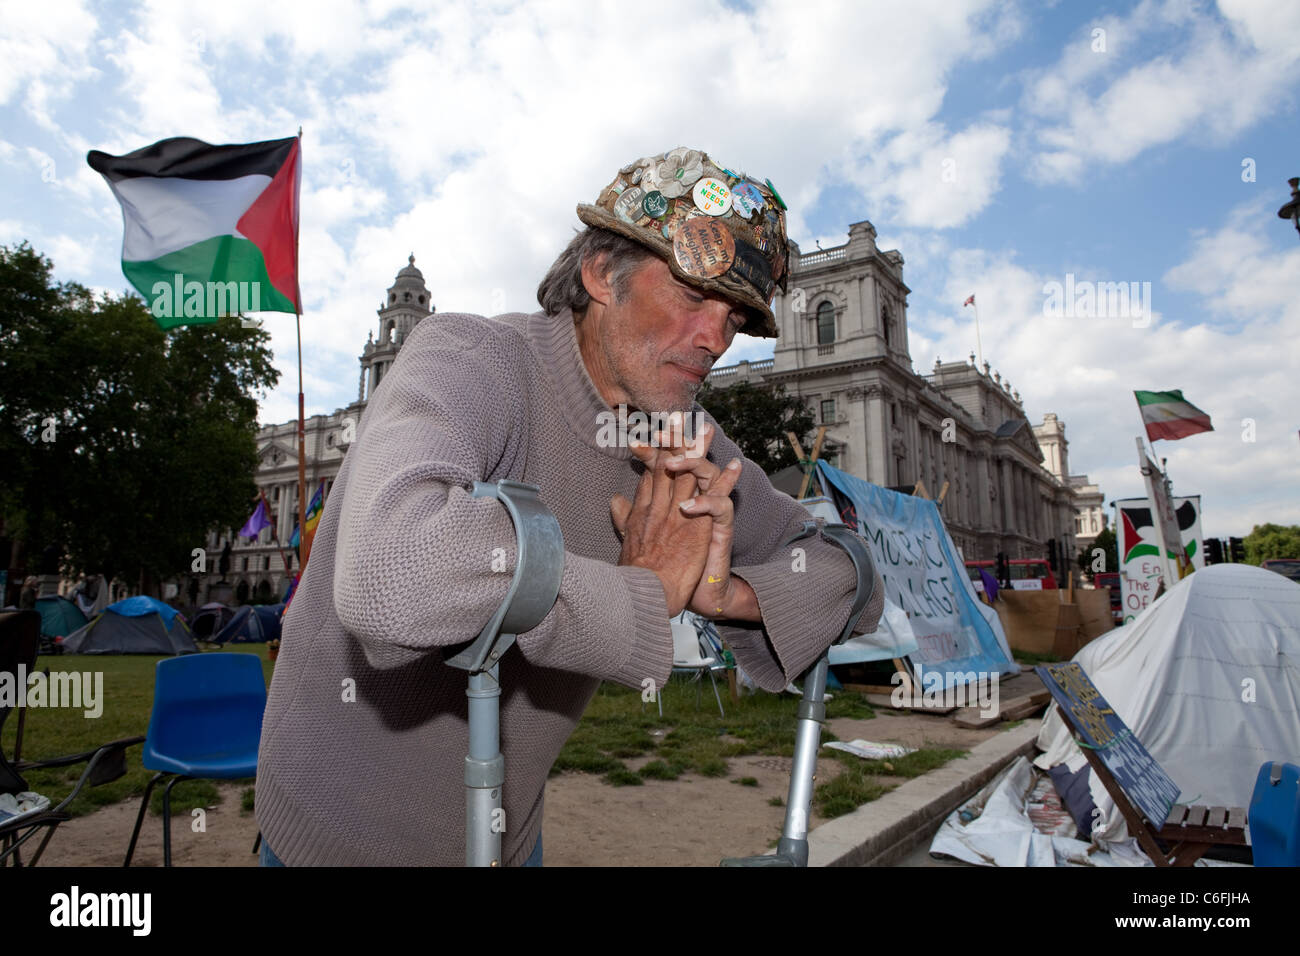 Brian Haw, anti-war protester at his peace camp outside Parliament Square. Brian has been at this site protesting since 2001. Stock Photo